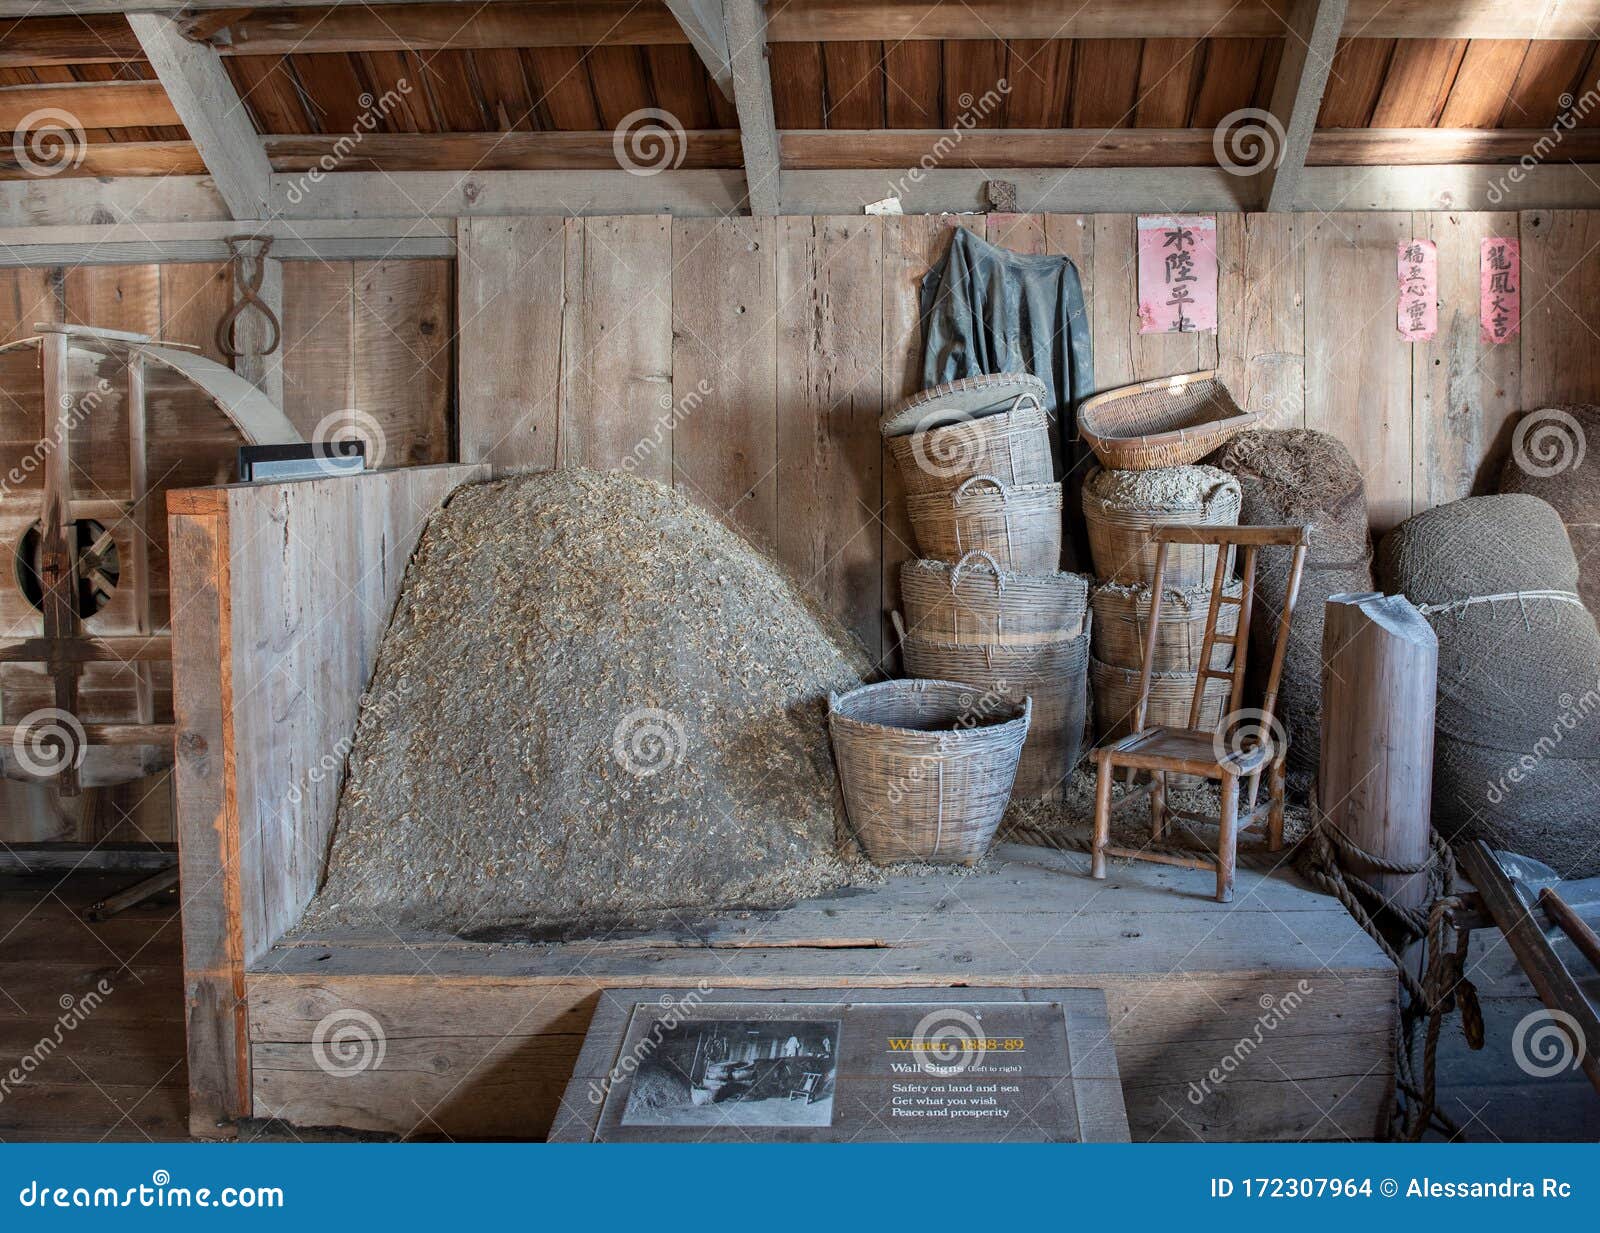 China Camp Museum Fishing Gear Editorial Stock Image - Image of